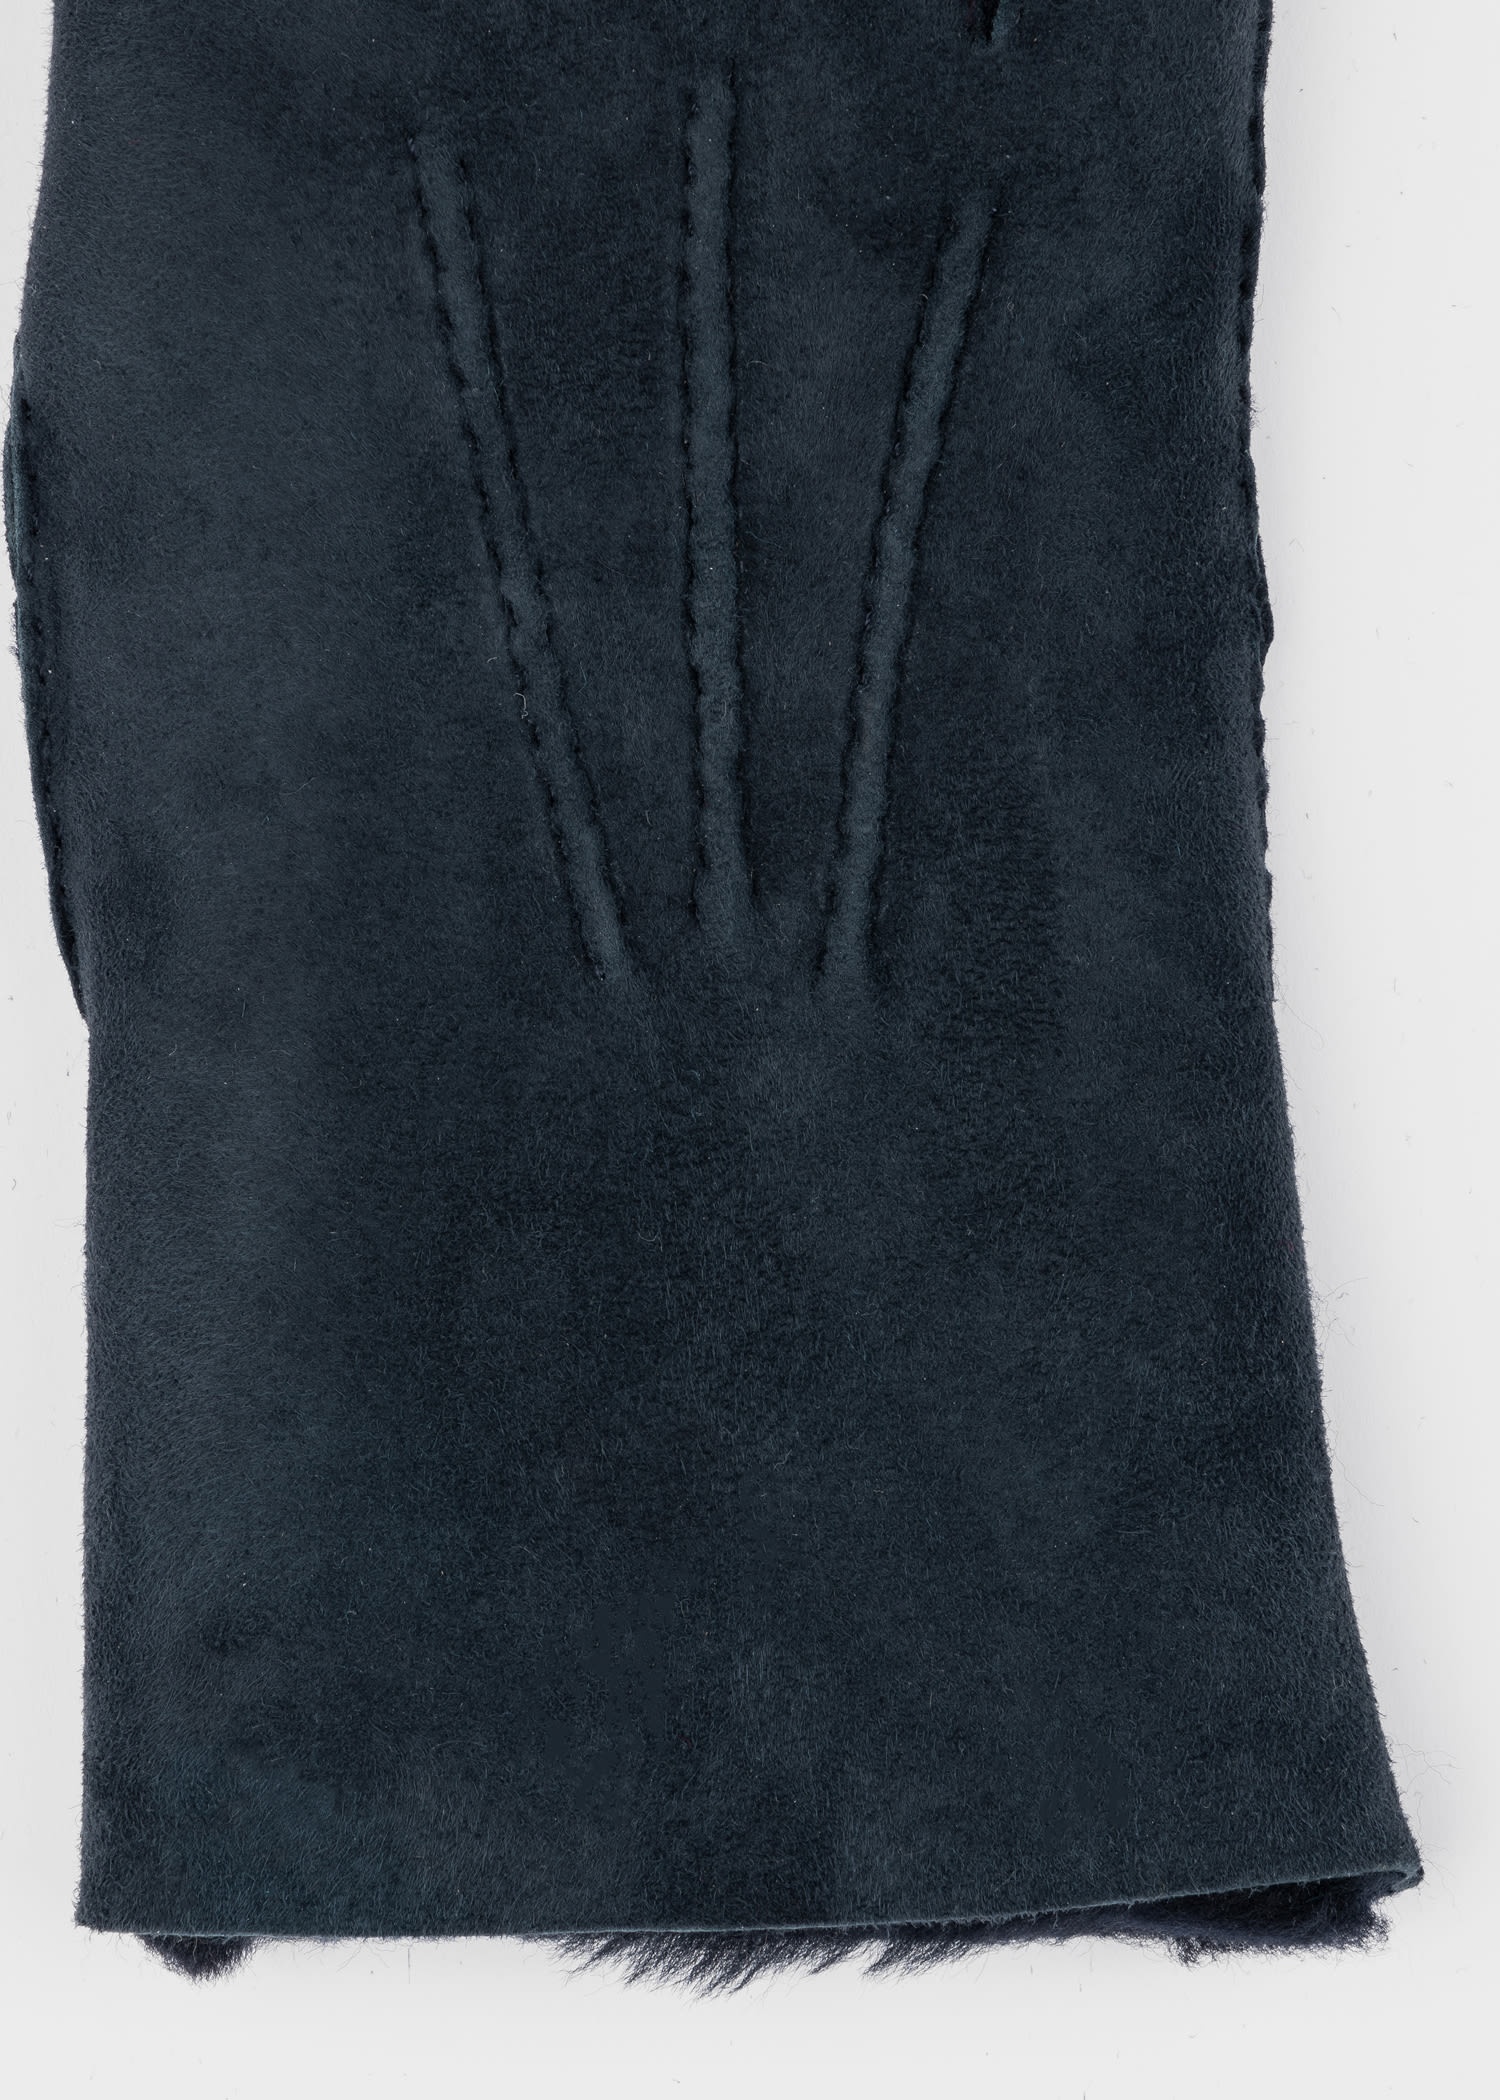 Shearling Gloves - 3